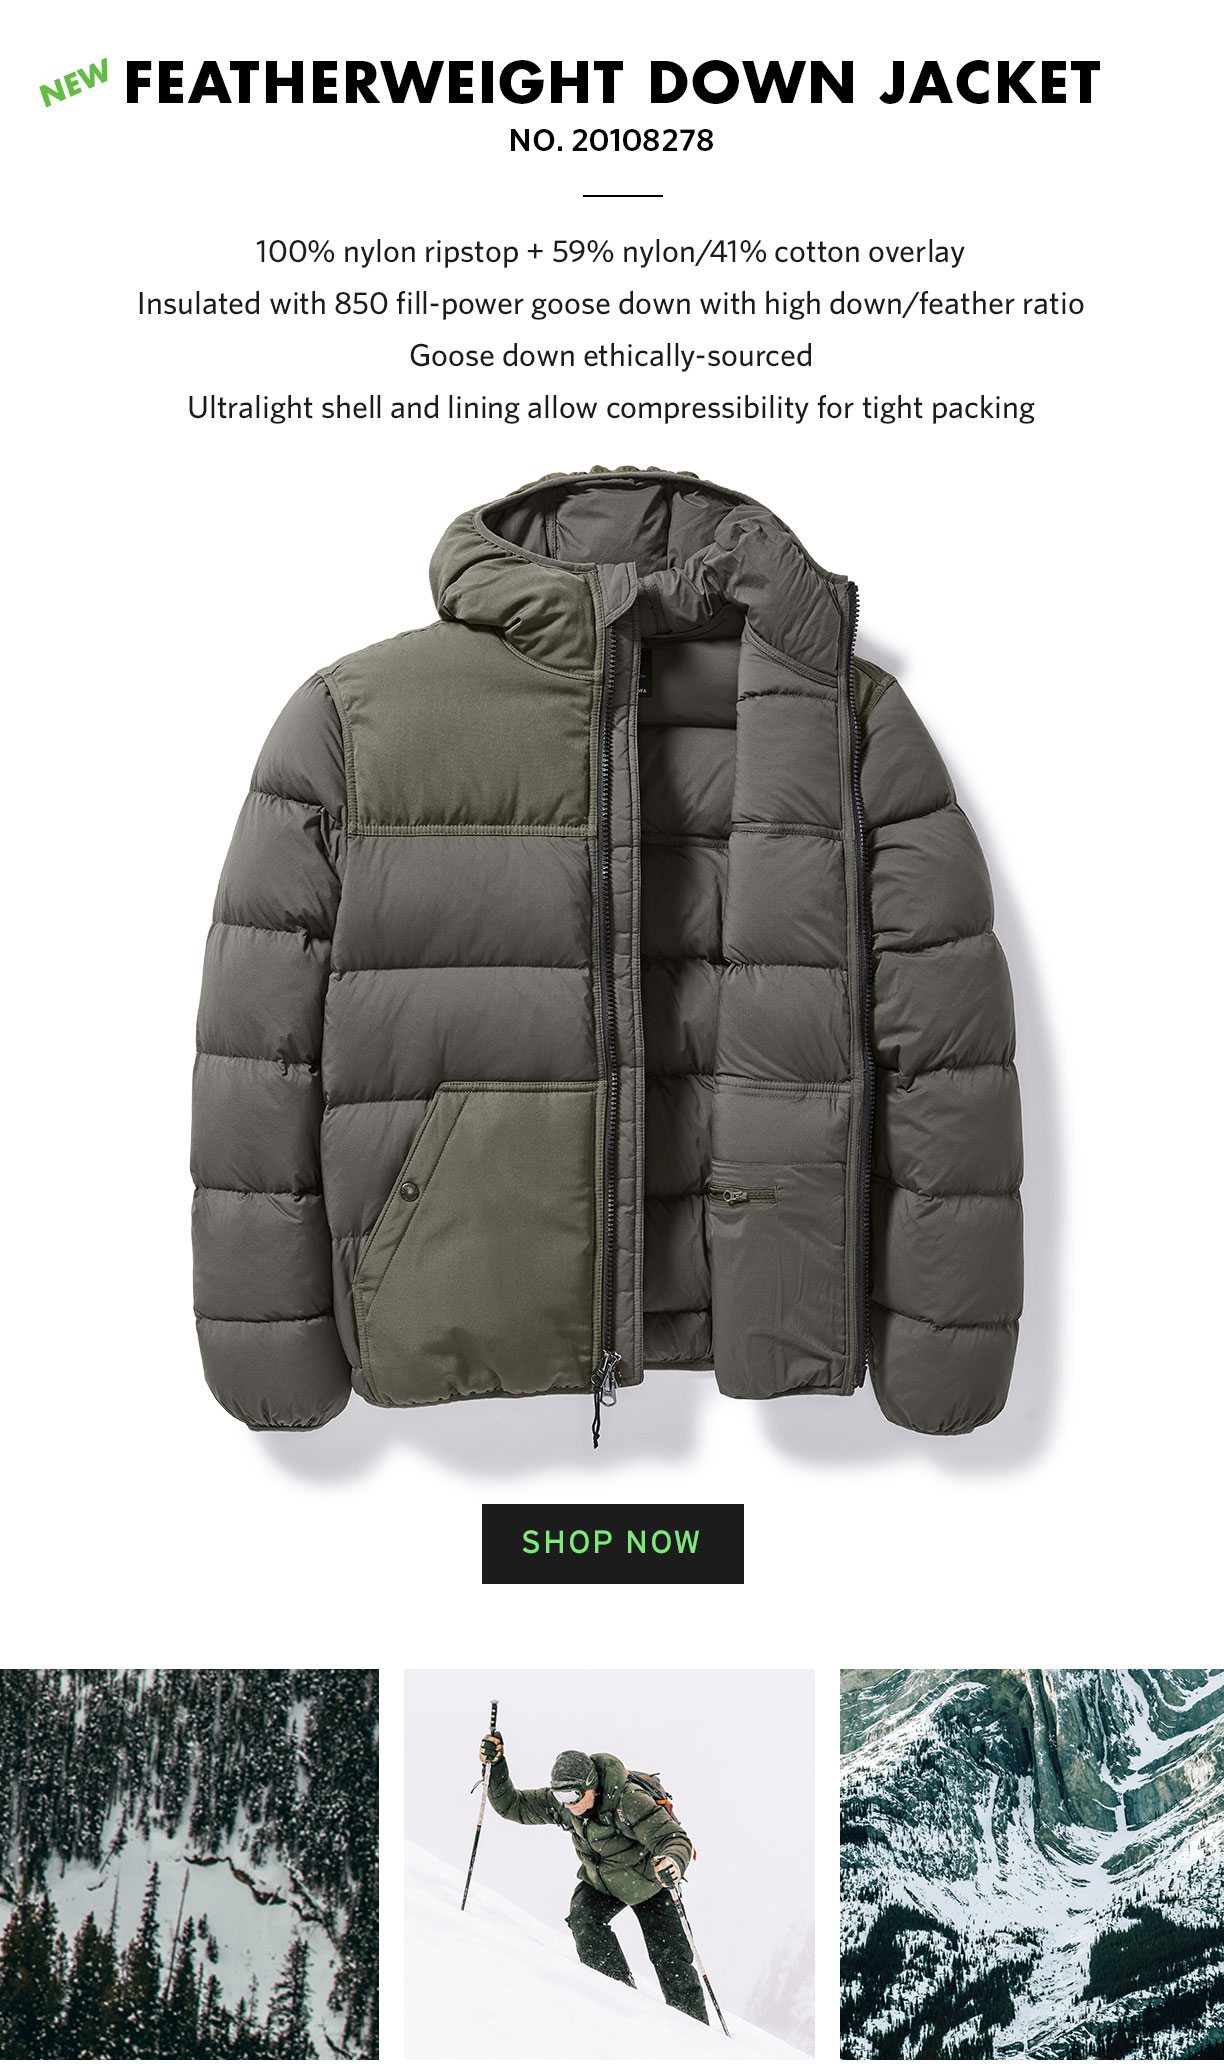 FEATHERWEIGHT DOWN JACKET. SHOP NOW